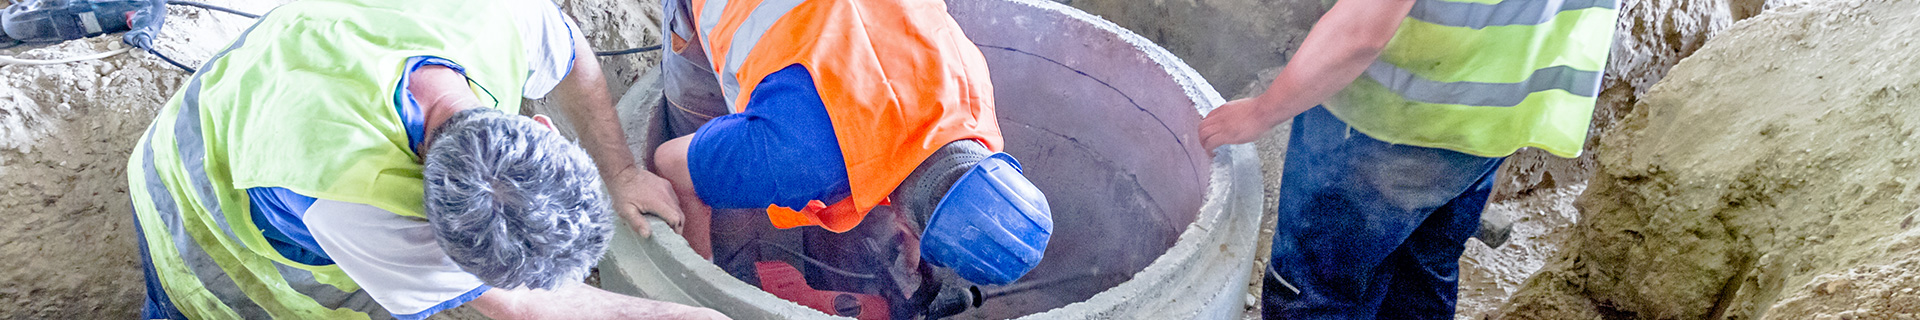 Confined Spaces: Entry Team Training – Construction Activities